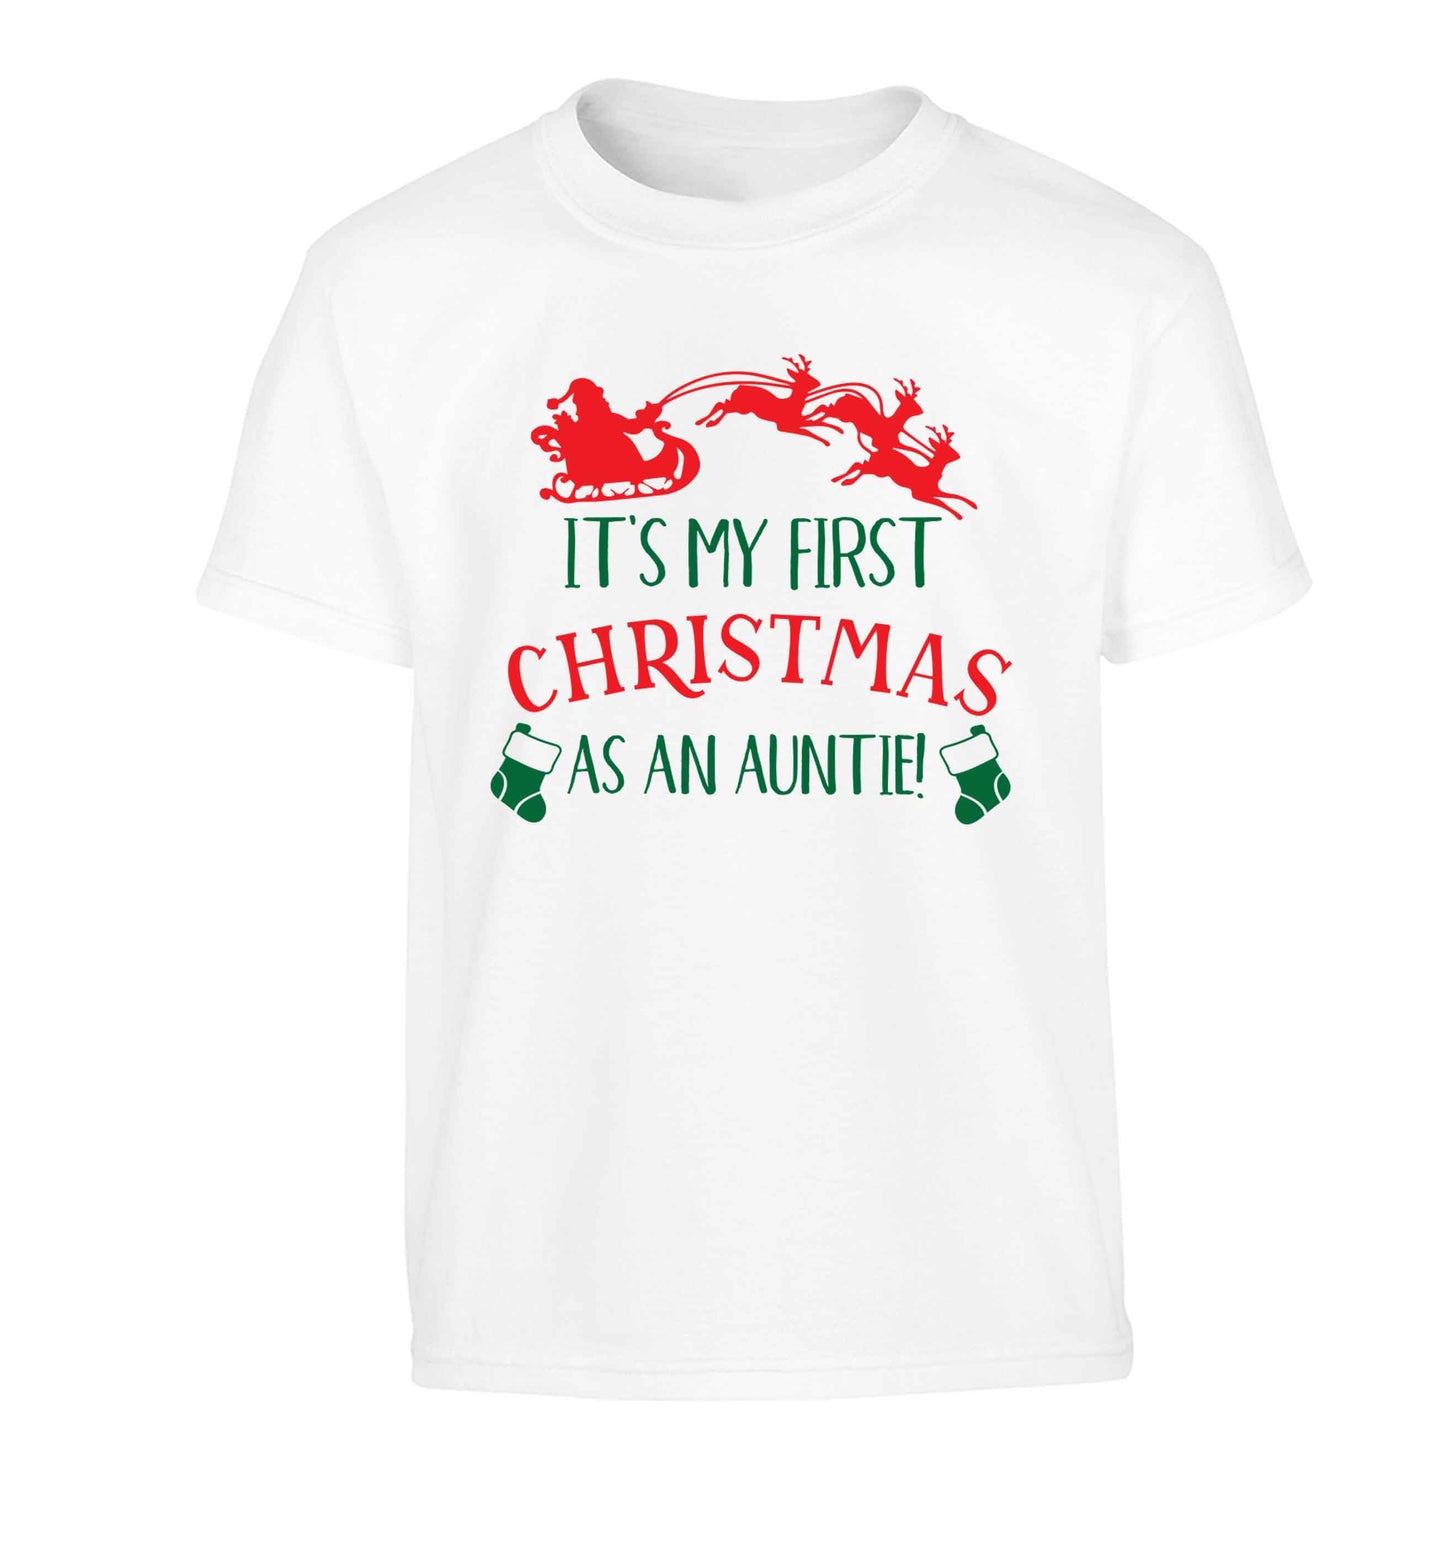 It's my first Christmas as an auntie! Children's white Tshirt 12-13 Years